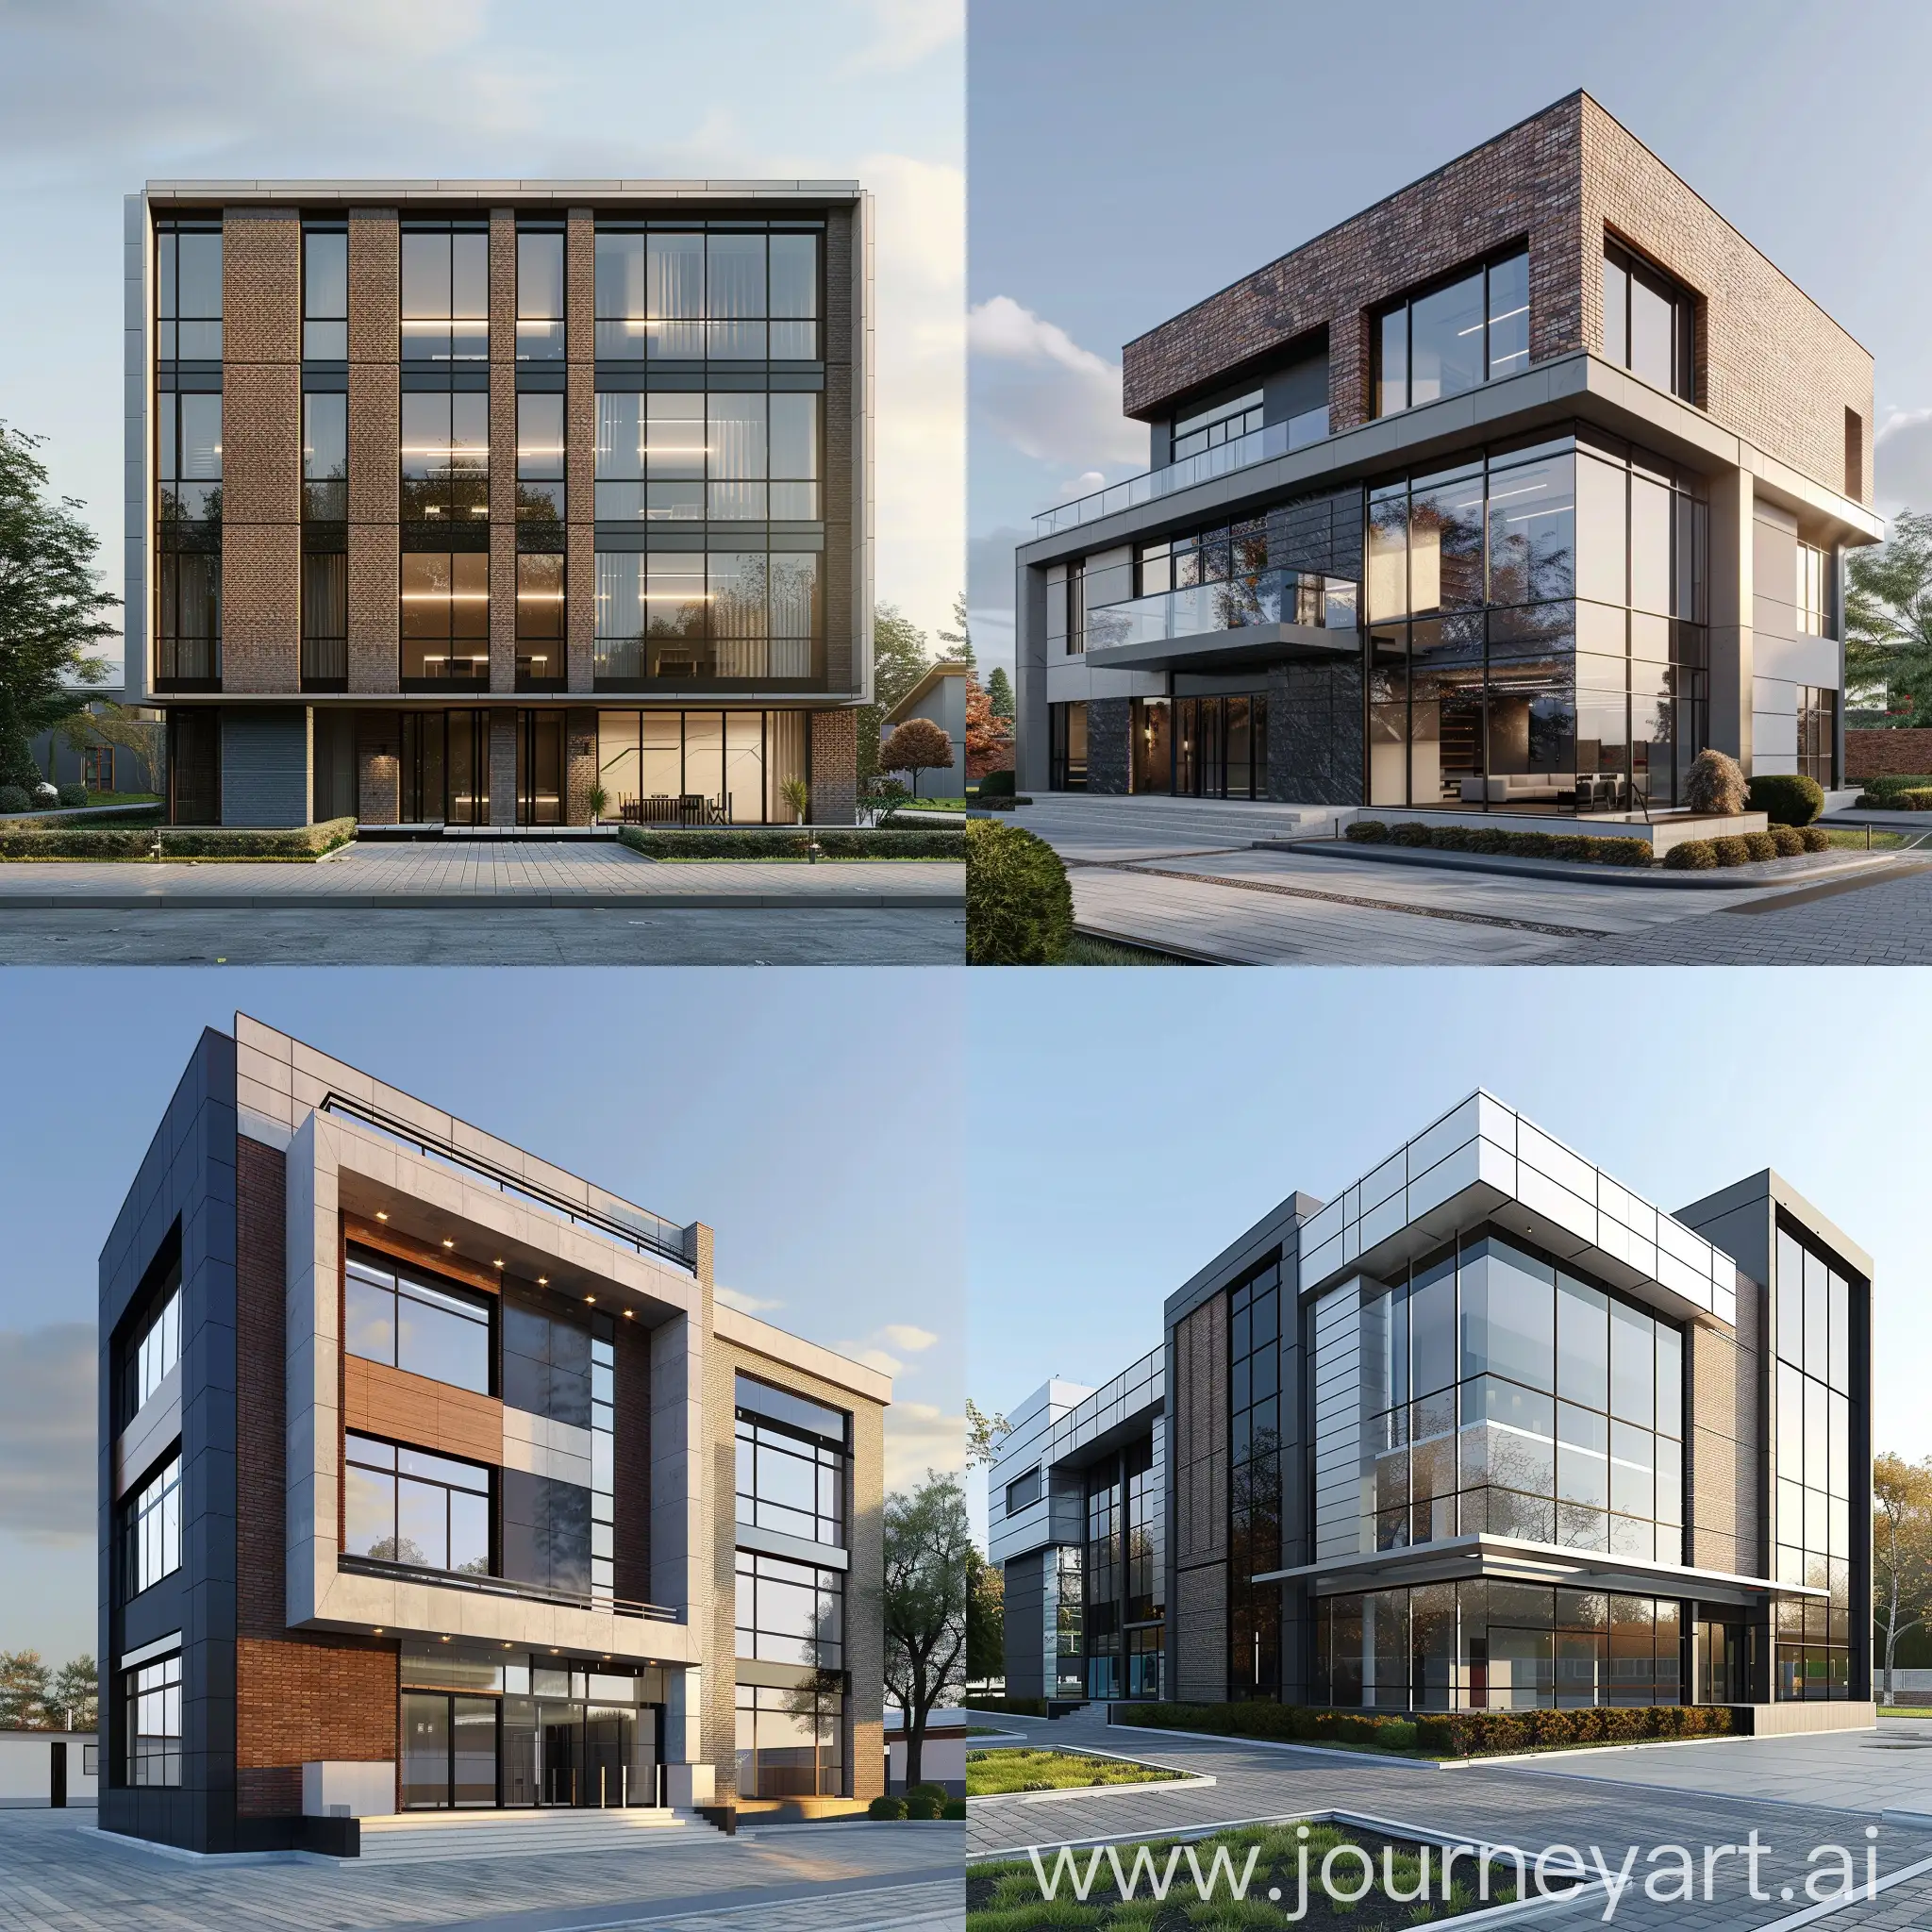 3d model, modern official building, the ground floor's height is 3.60 meters, first floor's height is 5.0 meters, modern facade with composite materials and brick, large windows, 